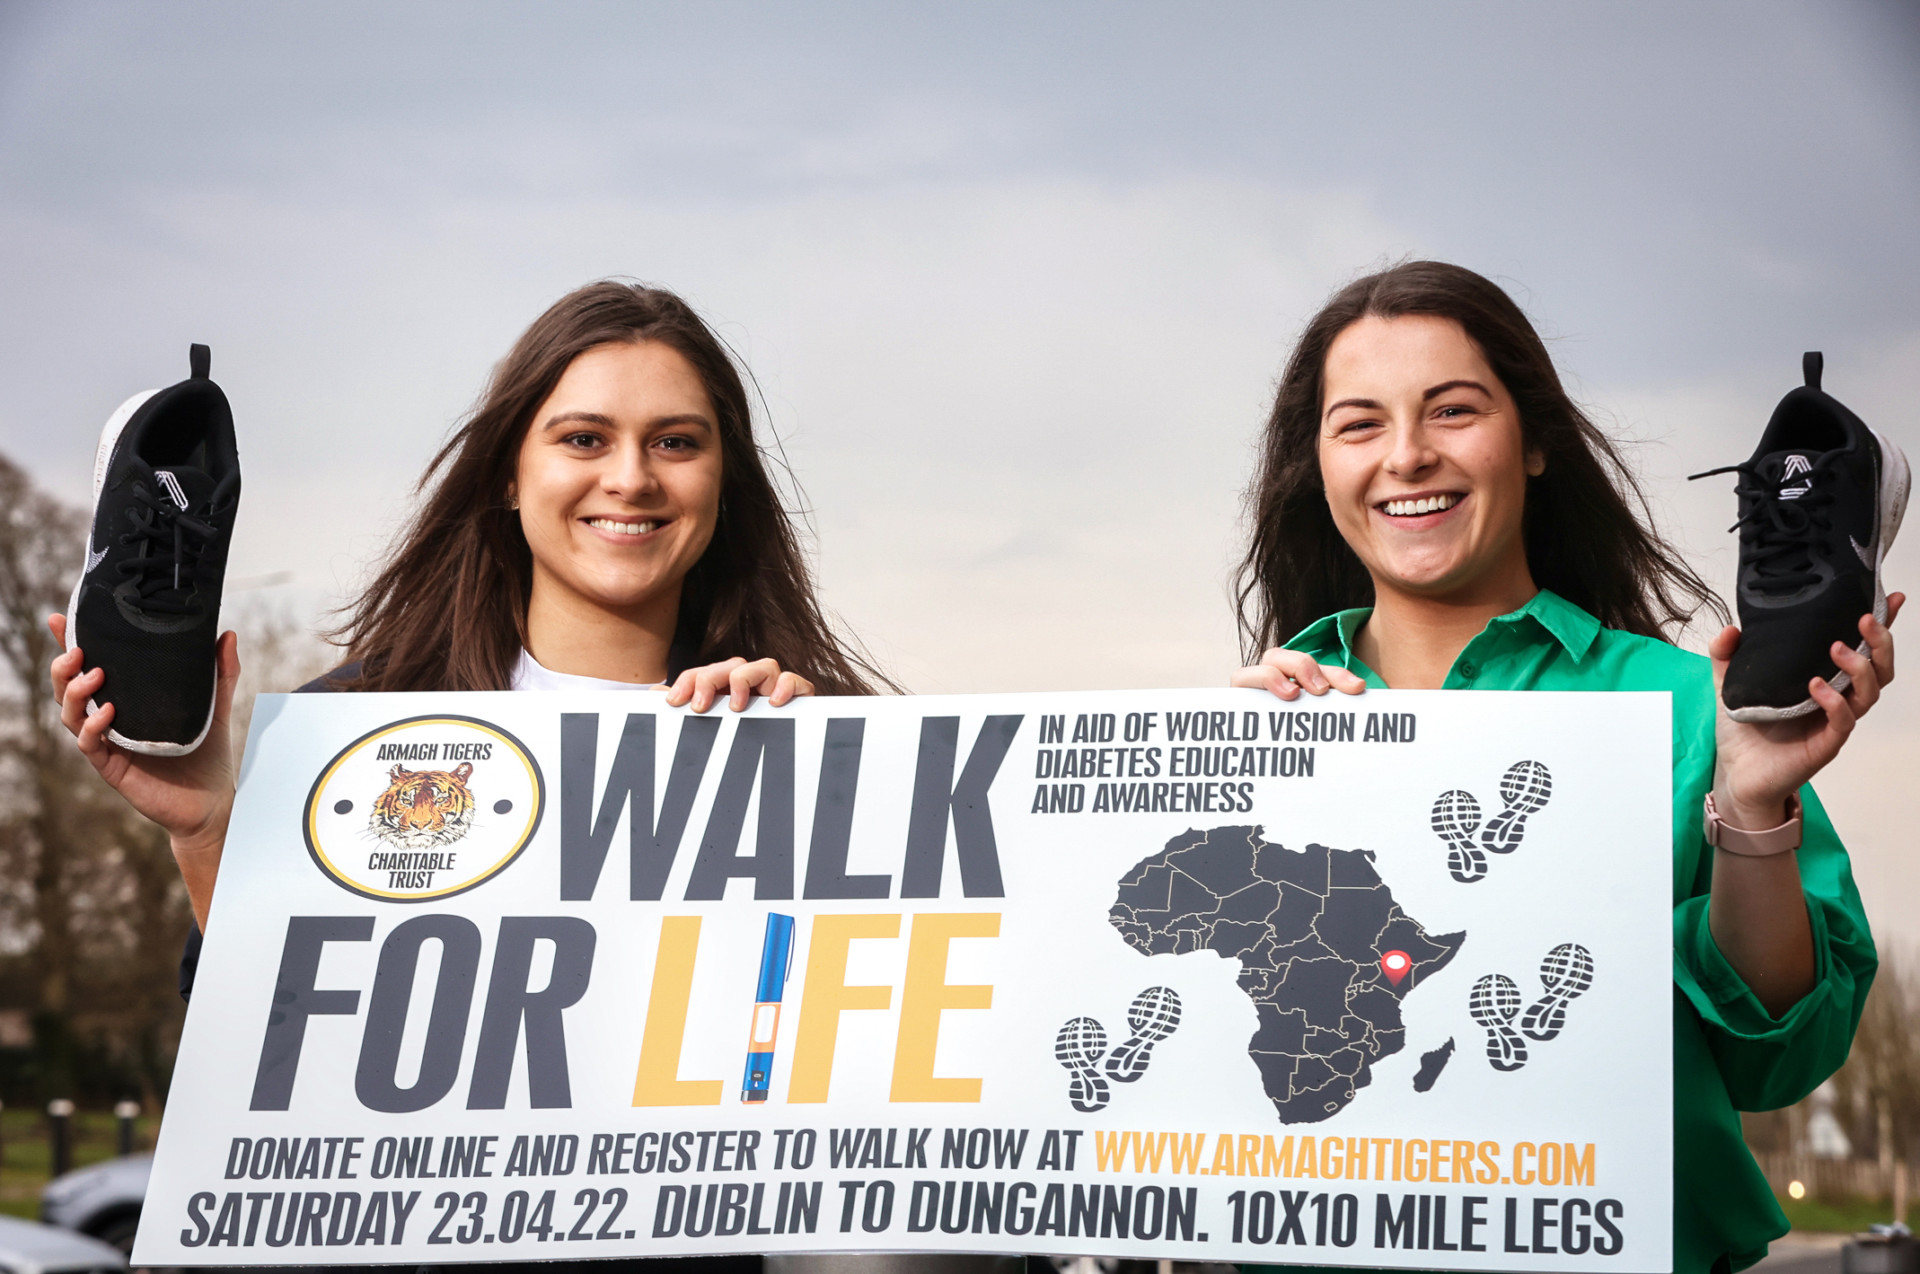 Donnelly sisters lead appeal for charity walk